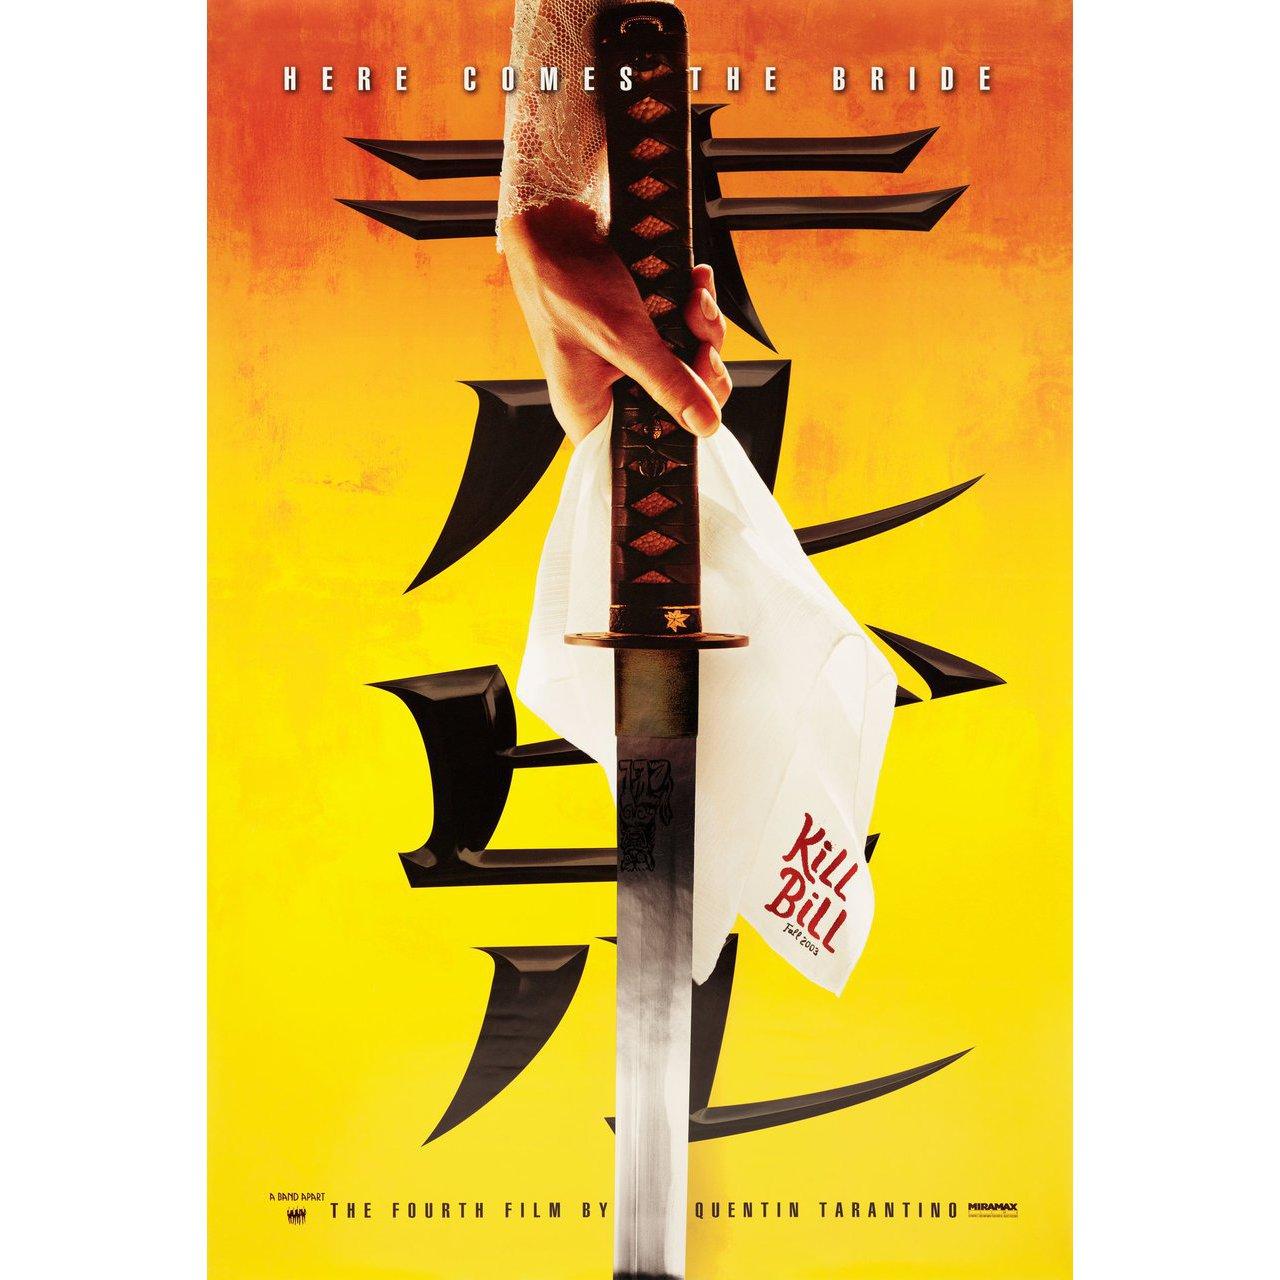 Original 2003 U.S. one sheet poster for the film Kill Bill: Vol. 1 directed by Quentin Tarantino with Uma Thurman / Lucy Liu / Vivica A. Fox / Daryl Hannah. Very Good-Fine condition, rolled. Please note: the size is stated in inches and the actual